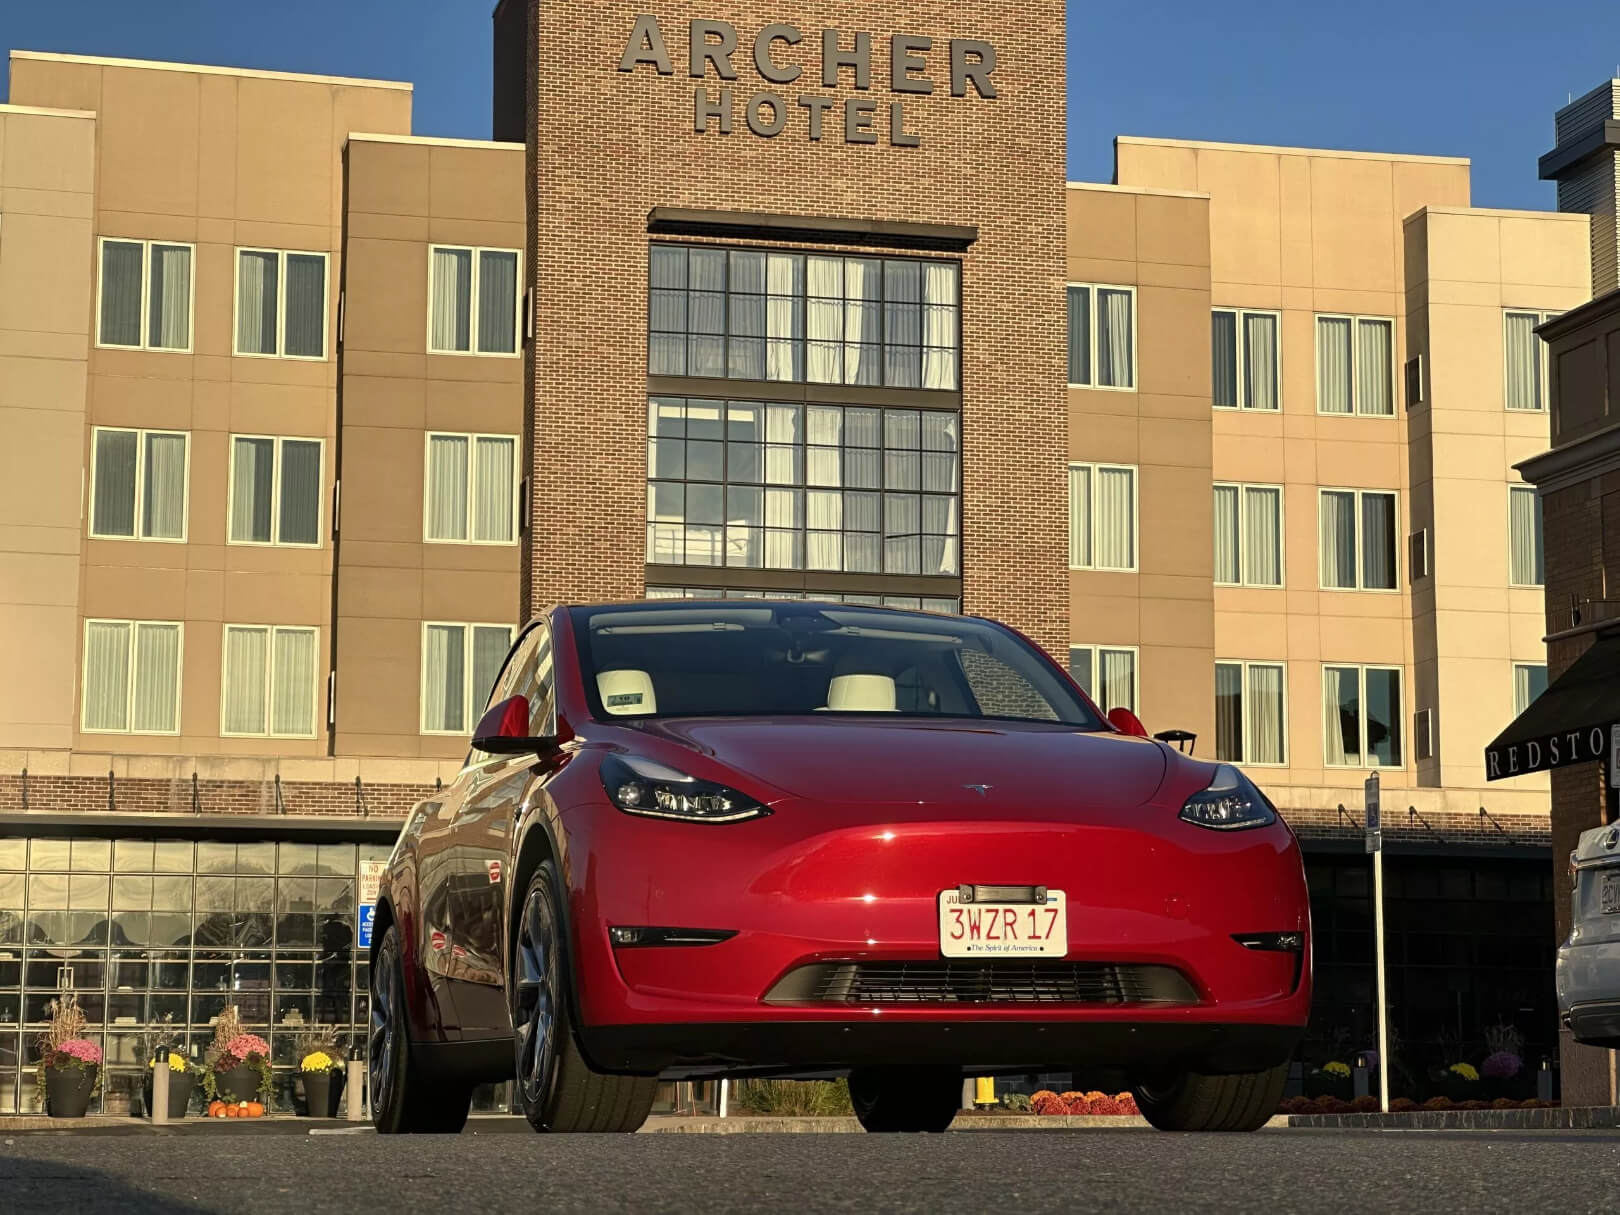 A picture of the red tesla car near Archer Hotel